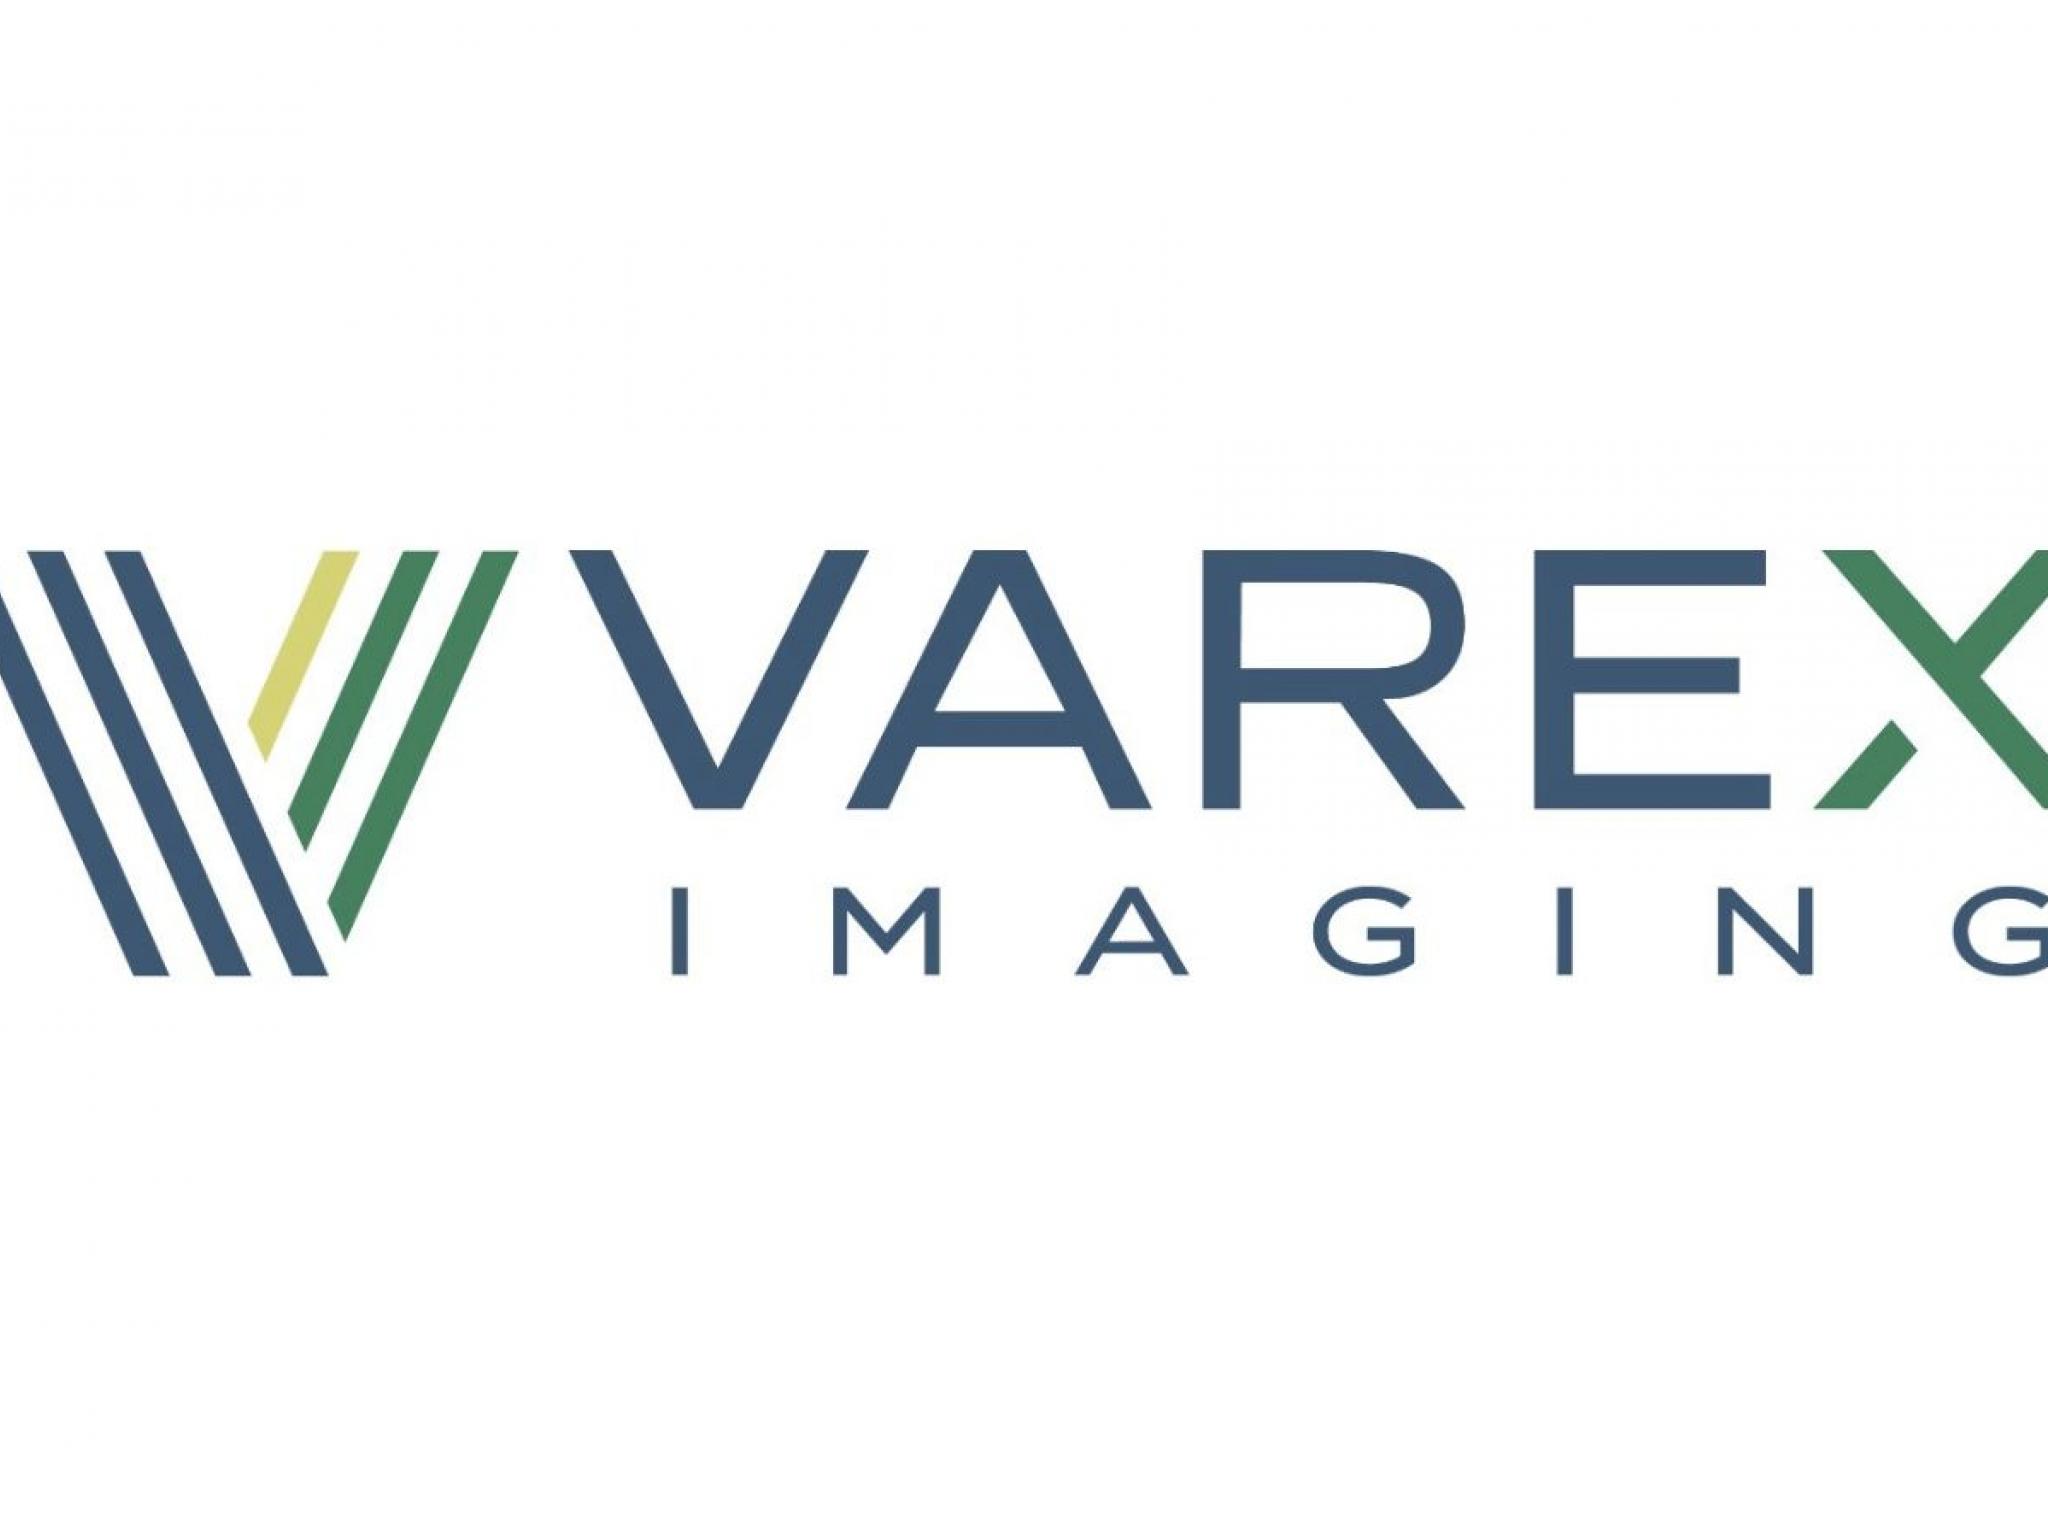  varex-imaging-reports-weak-sales-joins-alcon-xpeng--and-other-big-stocks-moving-lower-in-wednesdays-pre-market-session 